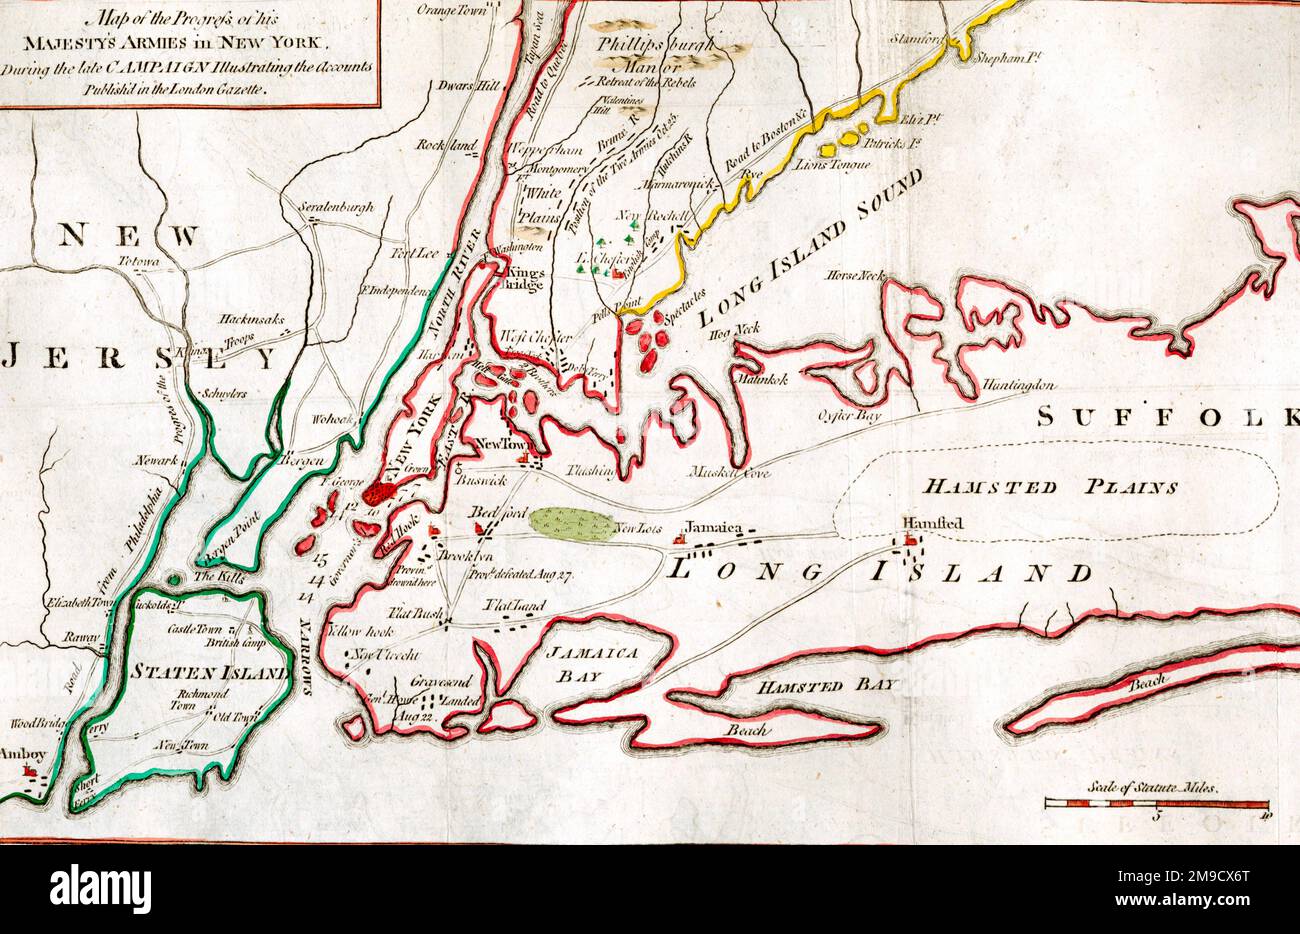 Map of the Progress of his Majesty's Armies in New York, During the late Campaign - American Revolutionary War of Independence Stock Photo